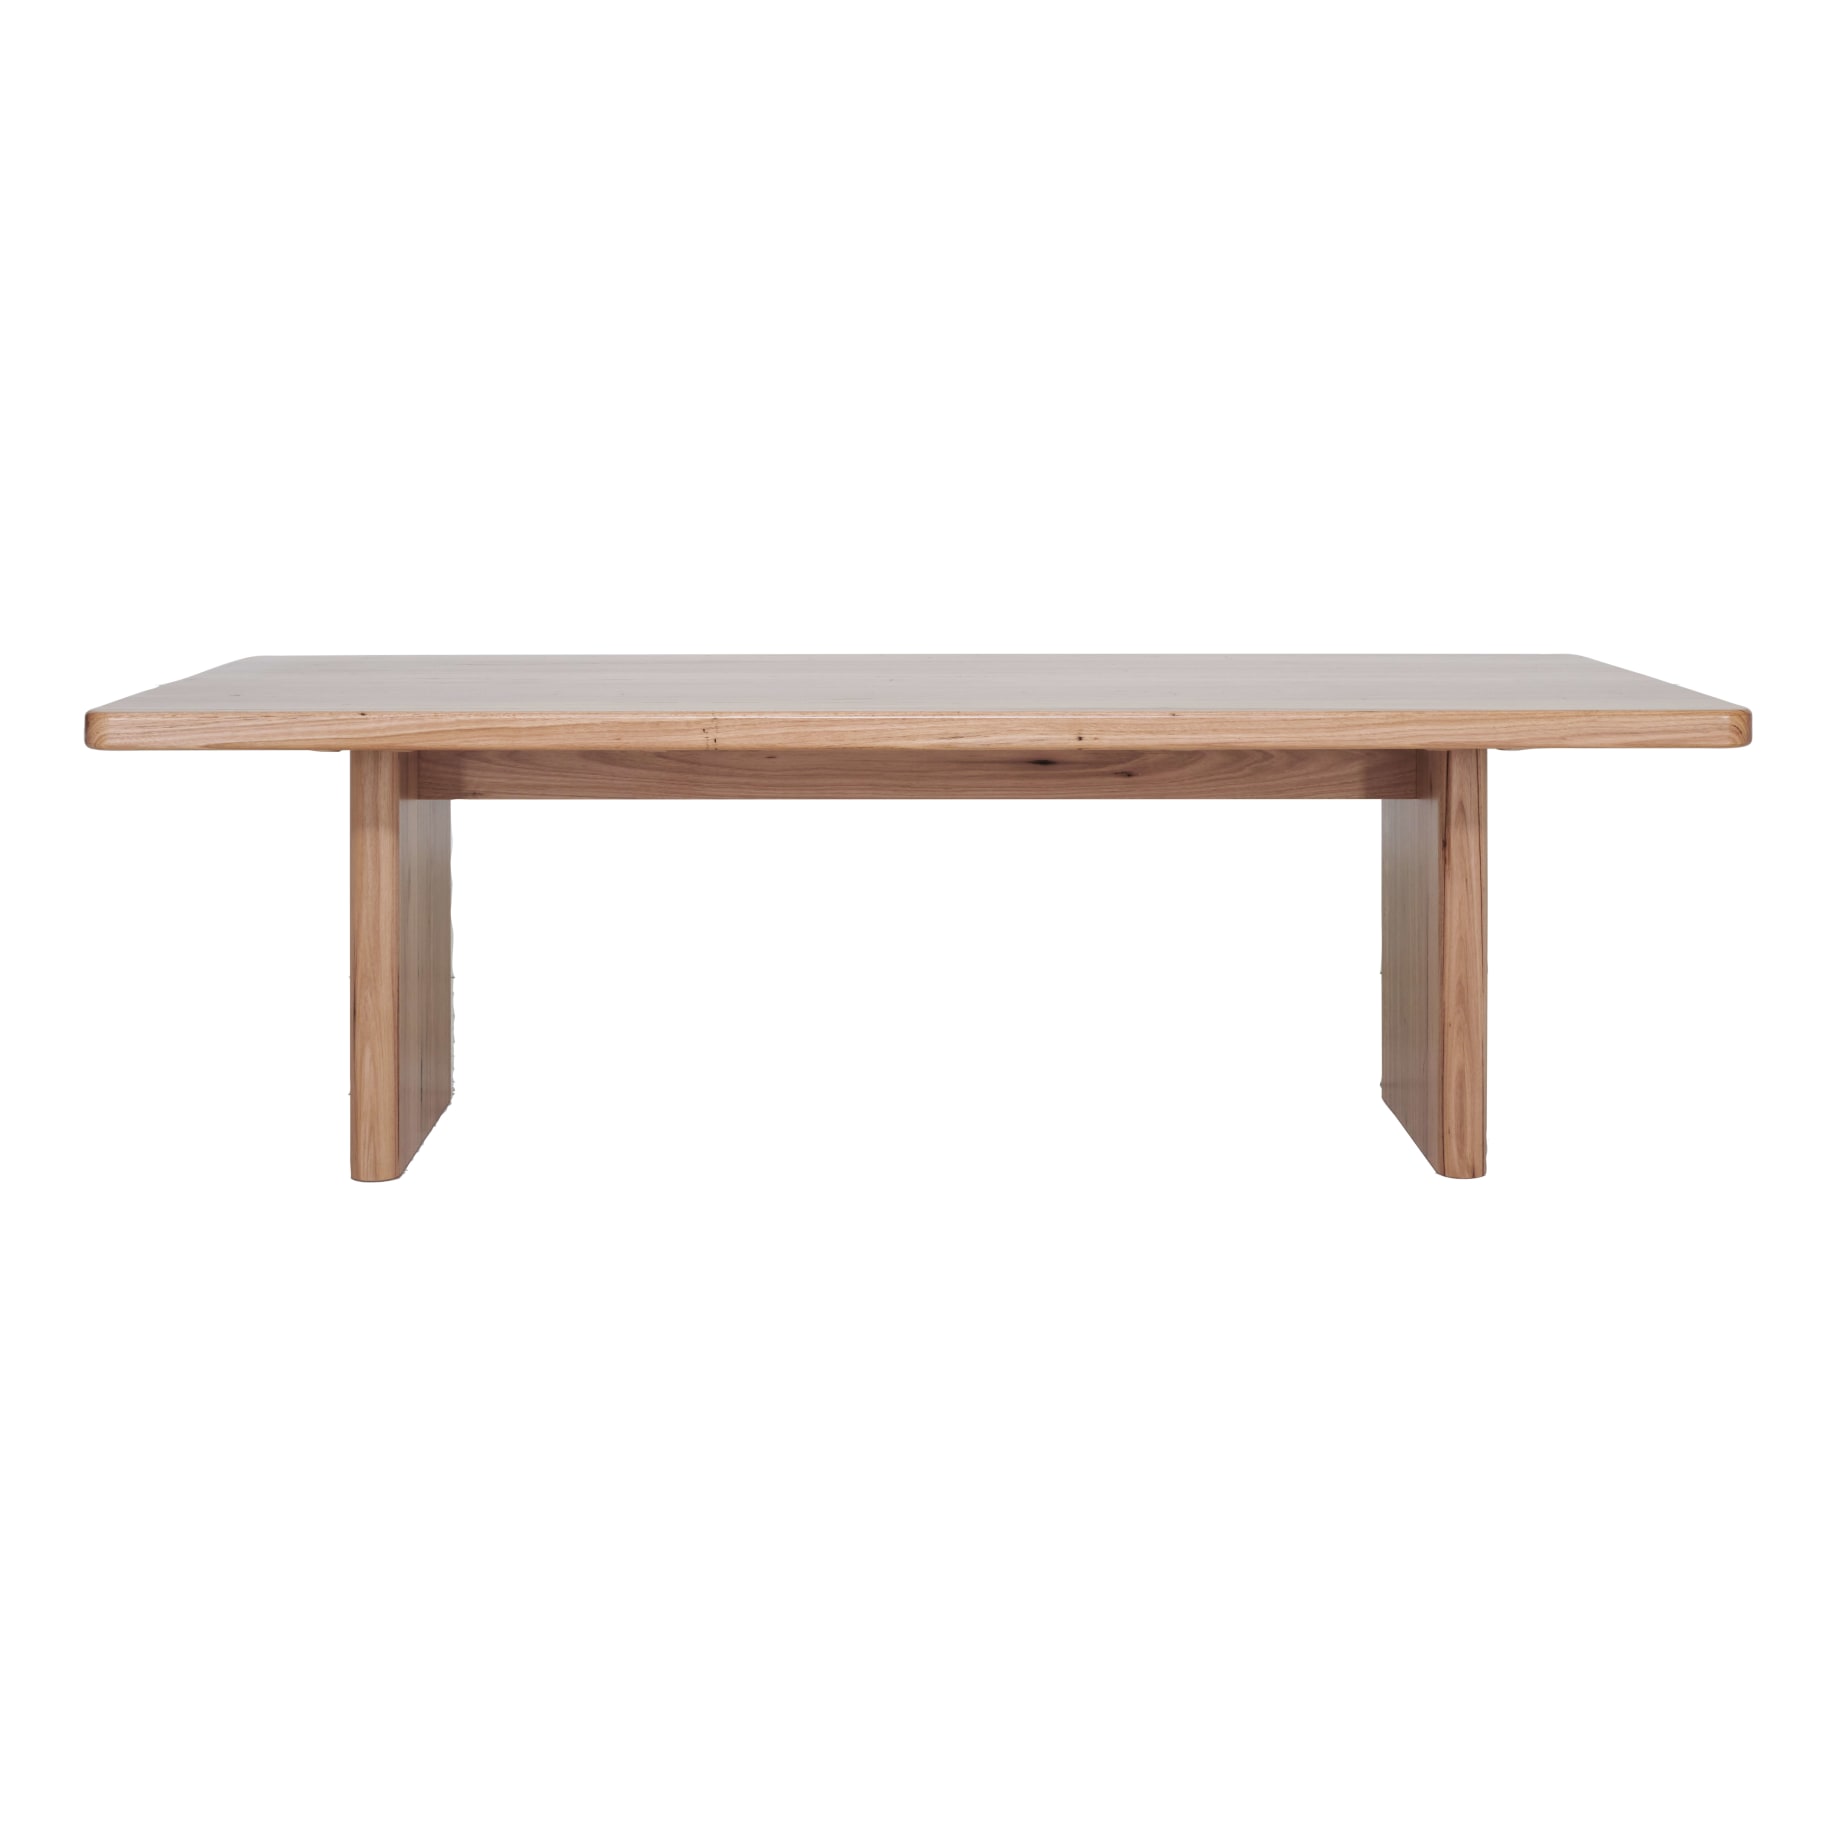 Harper Dining Table 180cm in Australian Timbers